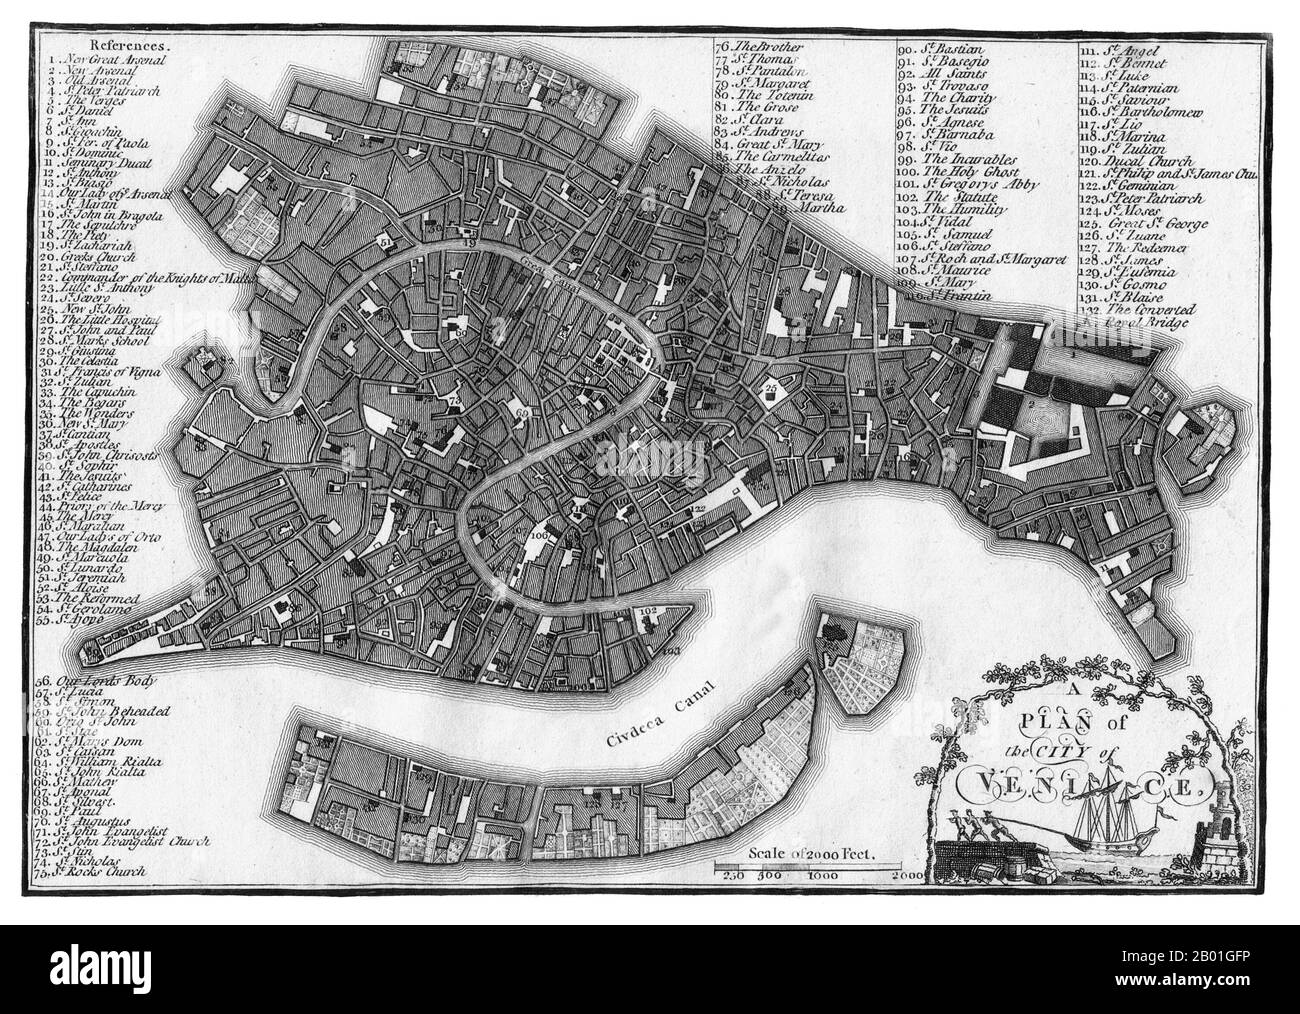 Italy/Venice: A map of Venice published by J. Stockdale, London, 1800.  For centuries Venice was Europe’s prime trading partner with the Middle East and the Byzantine Empire in particular. Venetian naval and commercial power was unrivalled in Europe until it lost a series of wars to the Ottoman armies in the 15th century. The city lost some 50,000 people to the Black Death in 1575-1577, but remained a major manufacturing centre and port well into the 18th century. Stock Photo